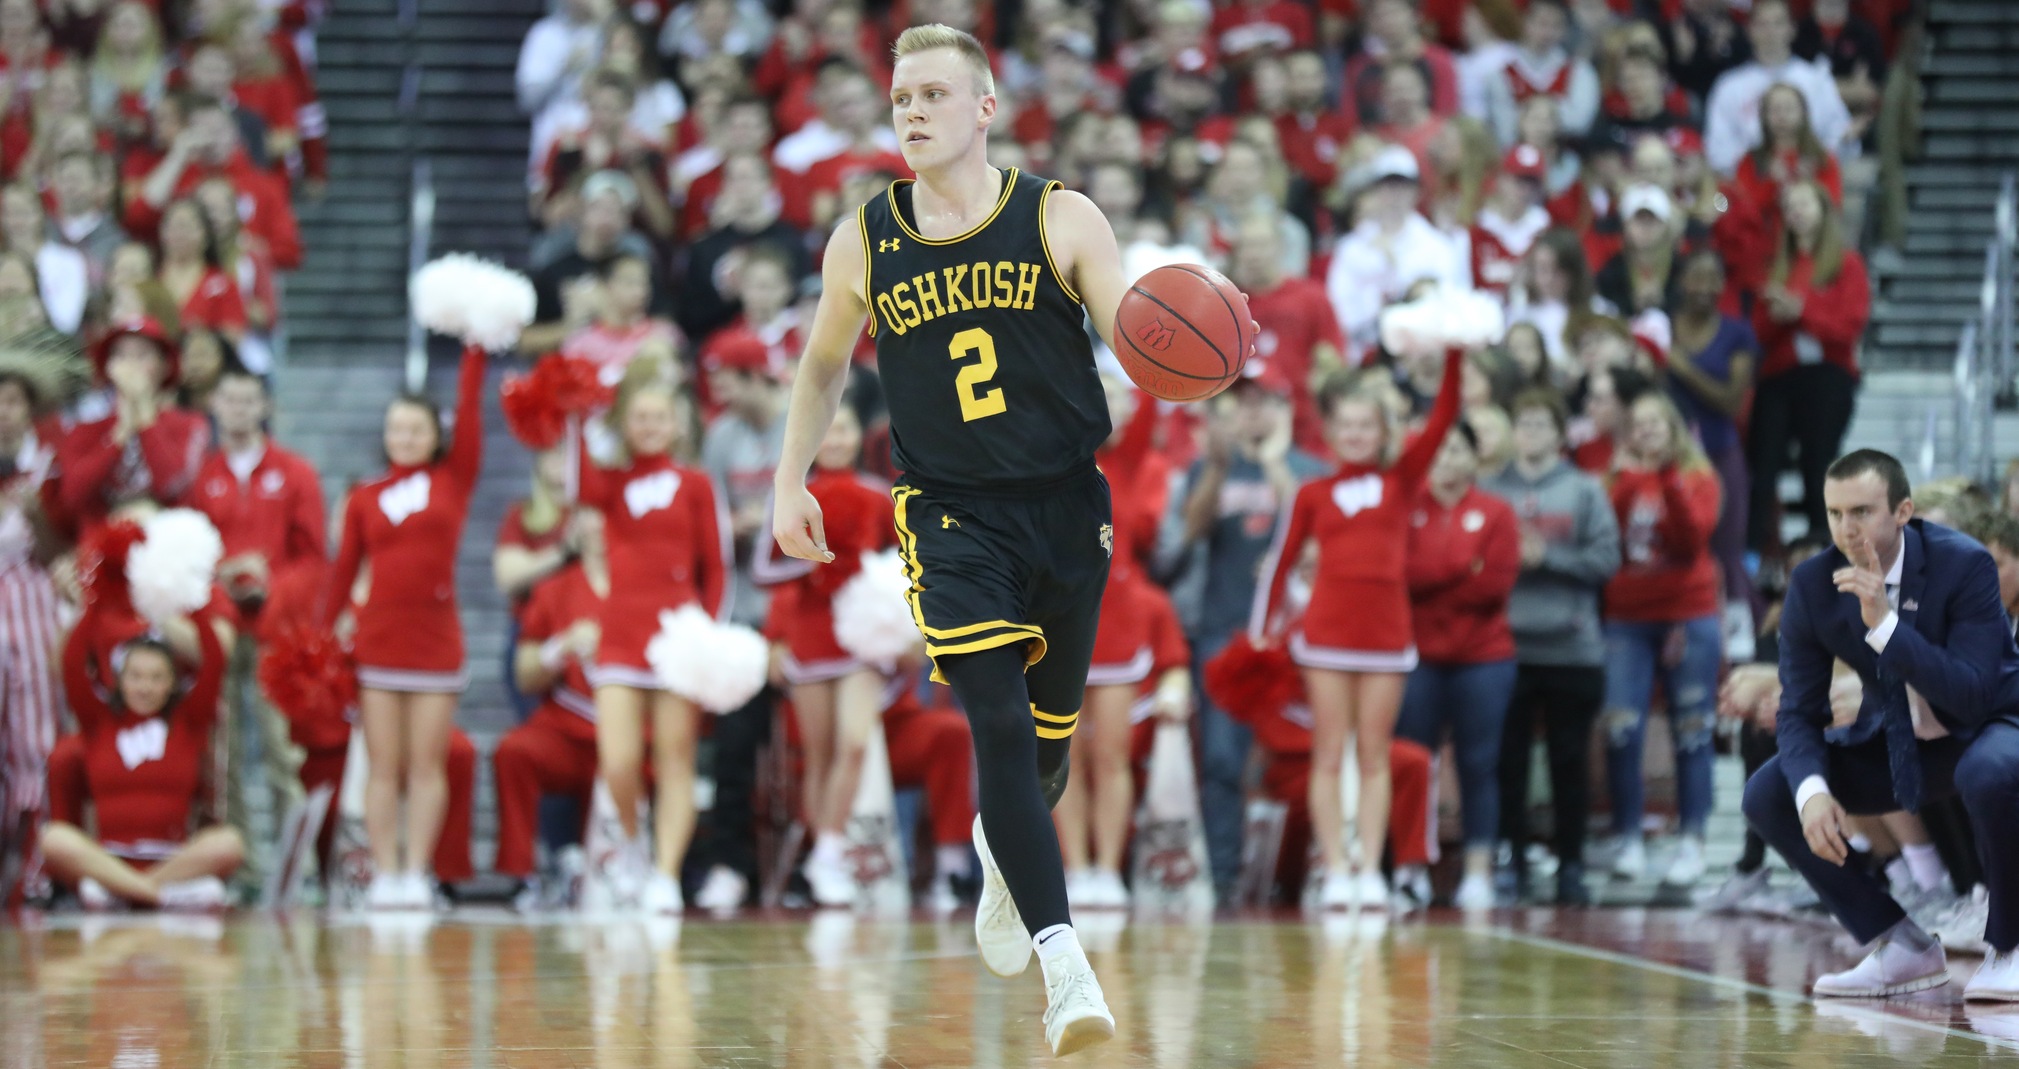 Ben Boots moved into ninth place on UW-Oshkosh's all-time scoring list (1,418 career points) against the Blue Devils.